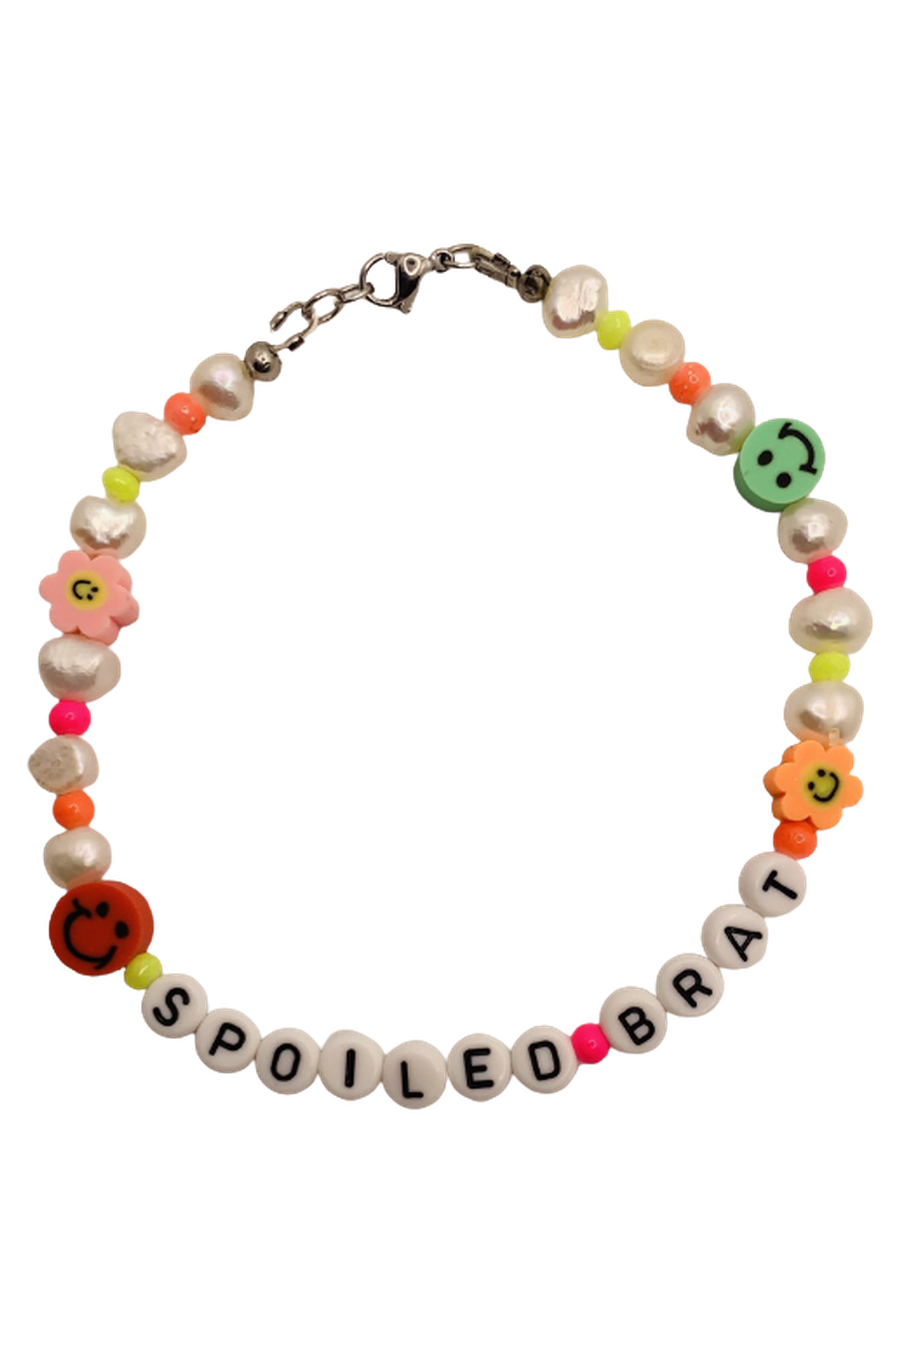 Shop Rad &amp; Refined Spoiled Brat Flower Power Ankle Bracelet - Premium Anklet from Rad and Refined Online now at Spoiled Brat 